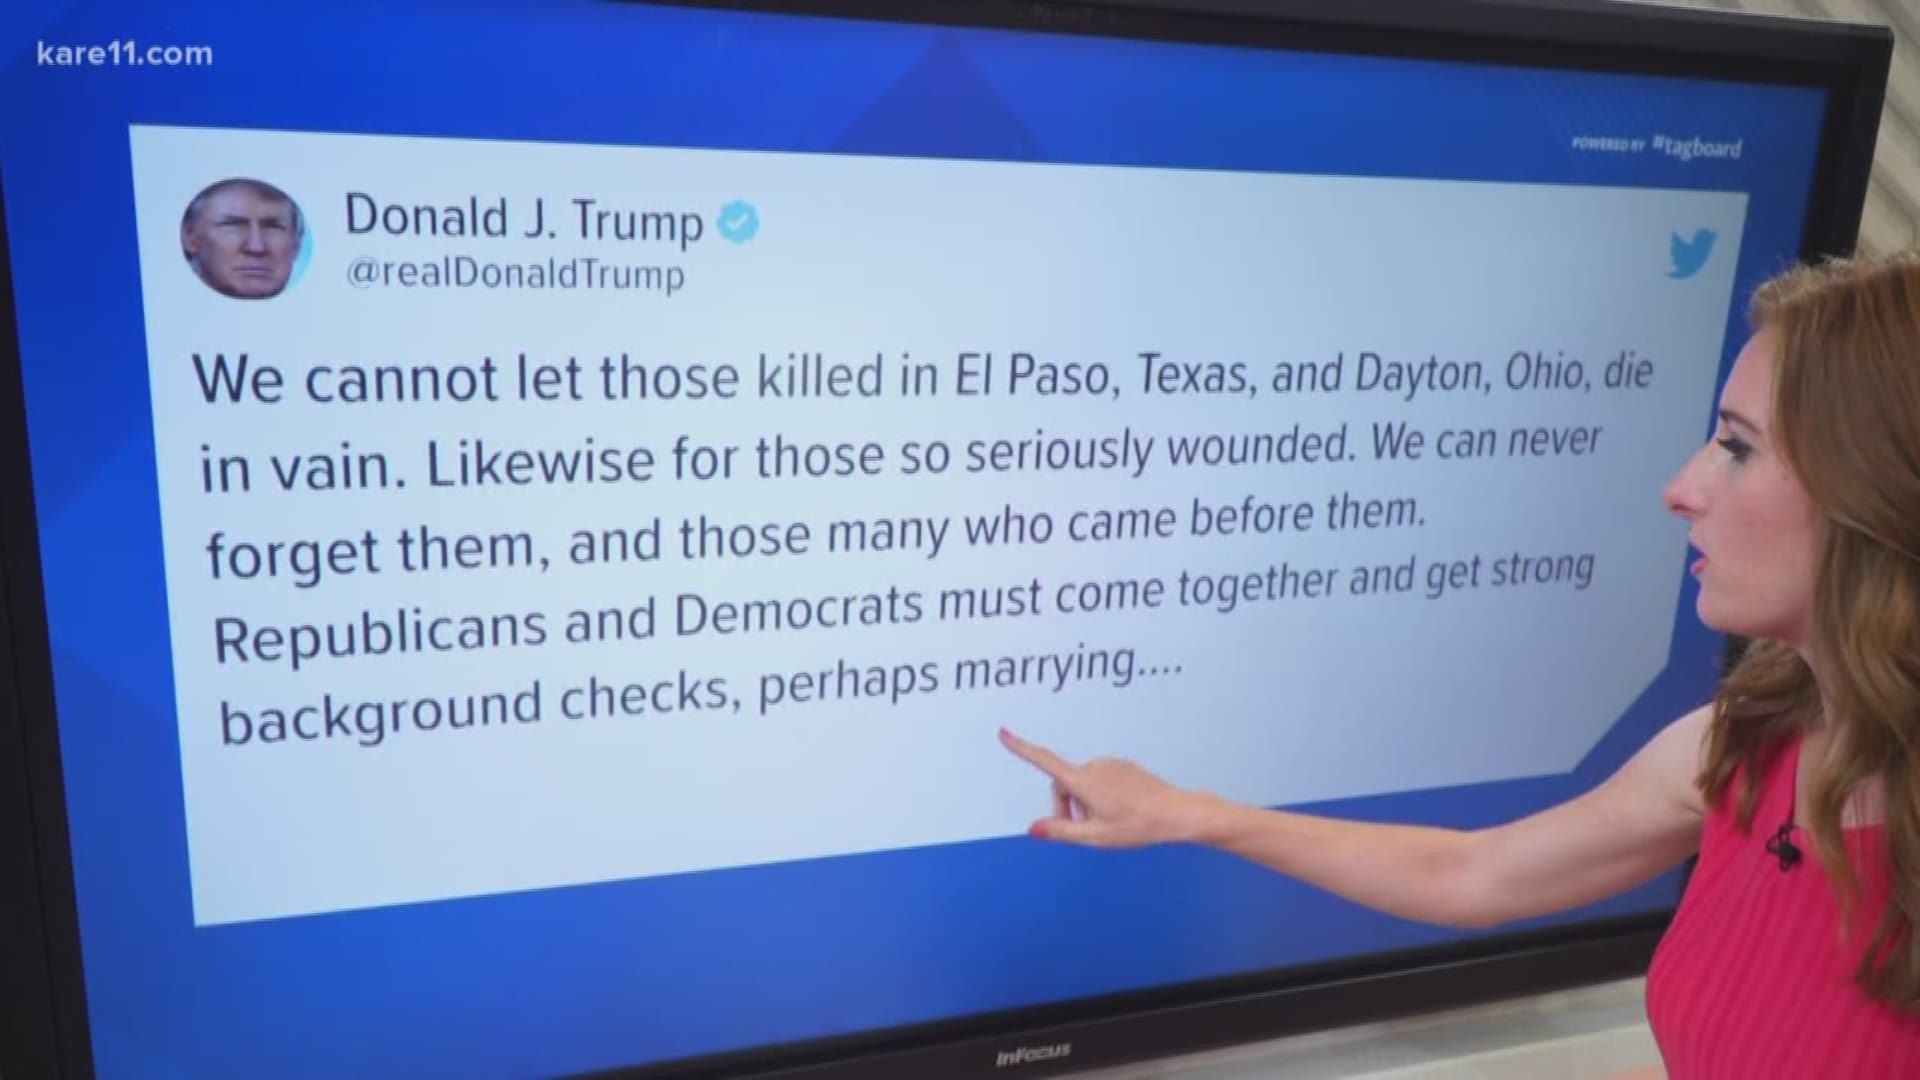 President Trump, Sen. Amy Klobuchar, and many other lawmakers are reacting to two mass shootings that killed 29 people over the weekend. https://kare11.tv/2YqaPSV